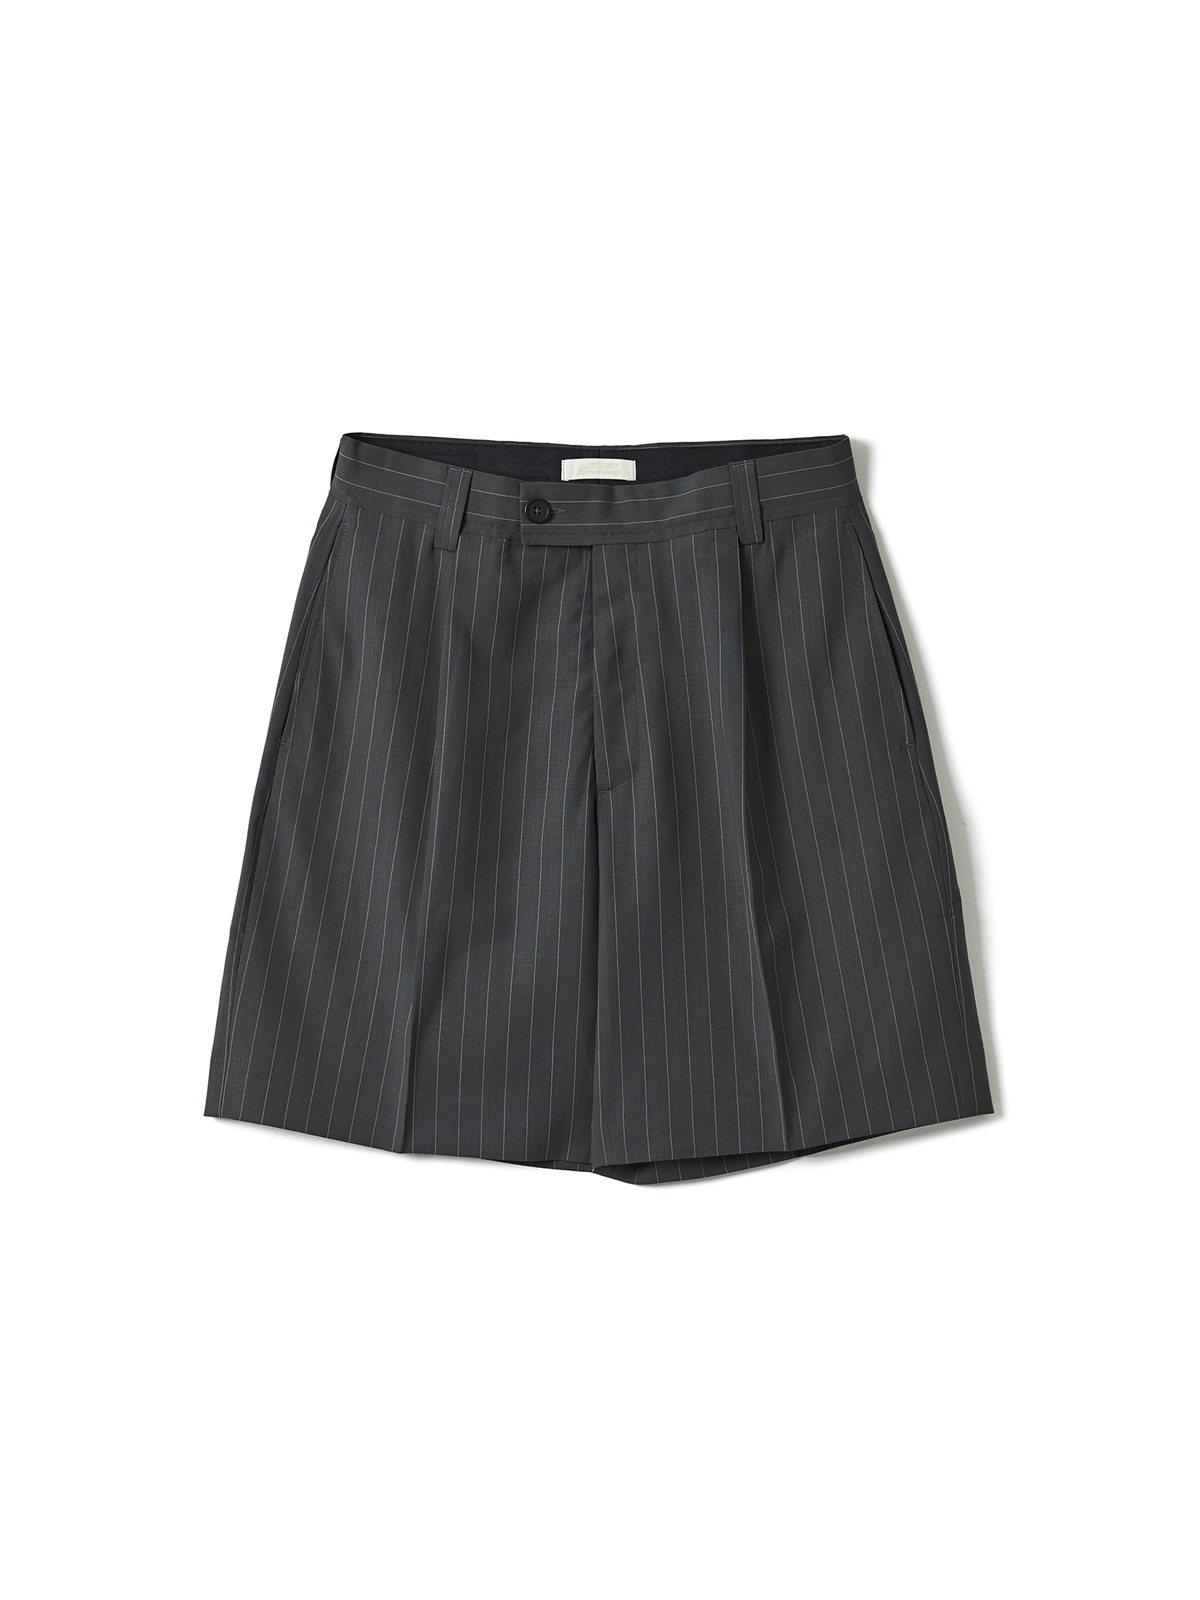 CLASSIC SHORTS (ANTHRACITE PINSTRIPE)